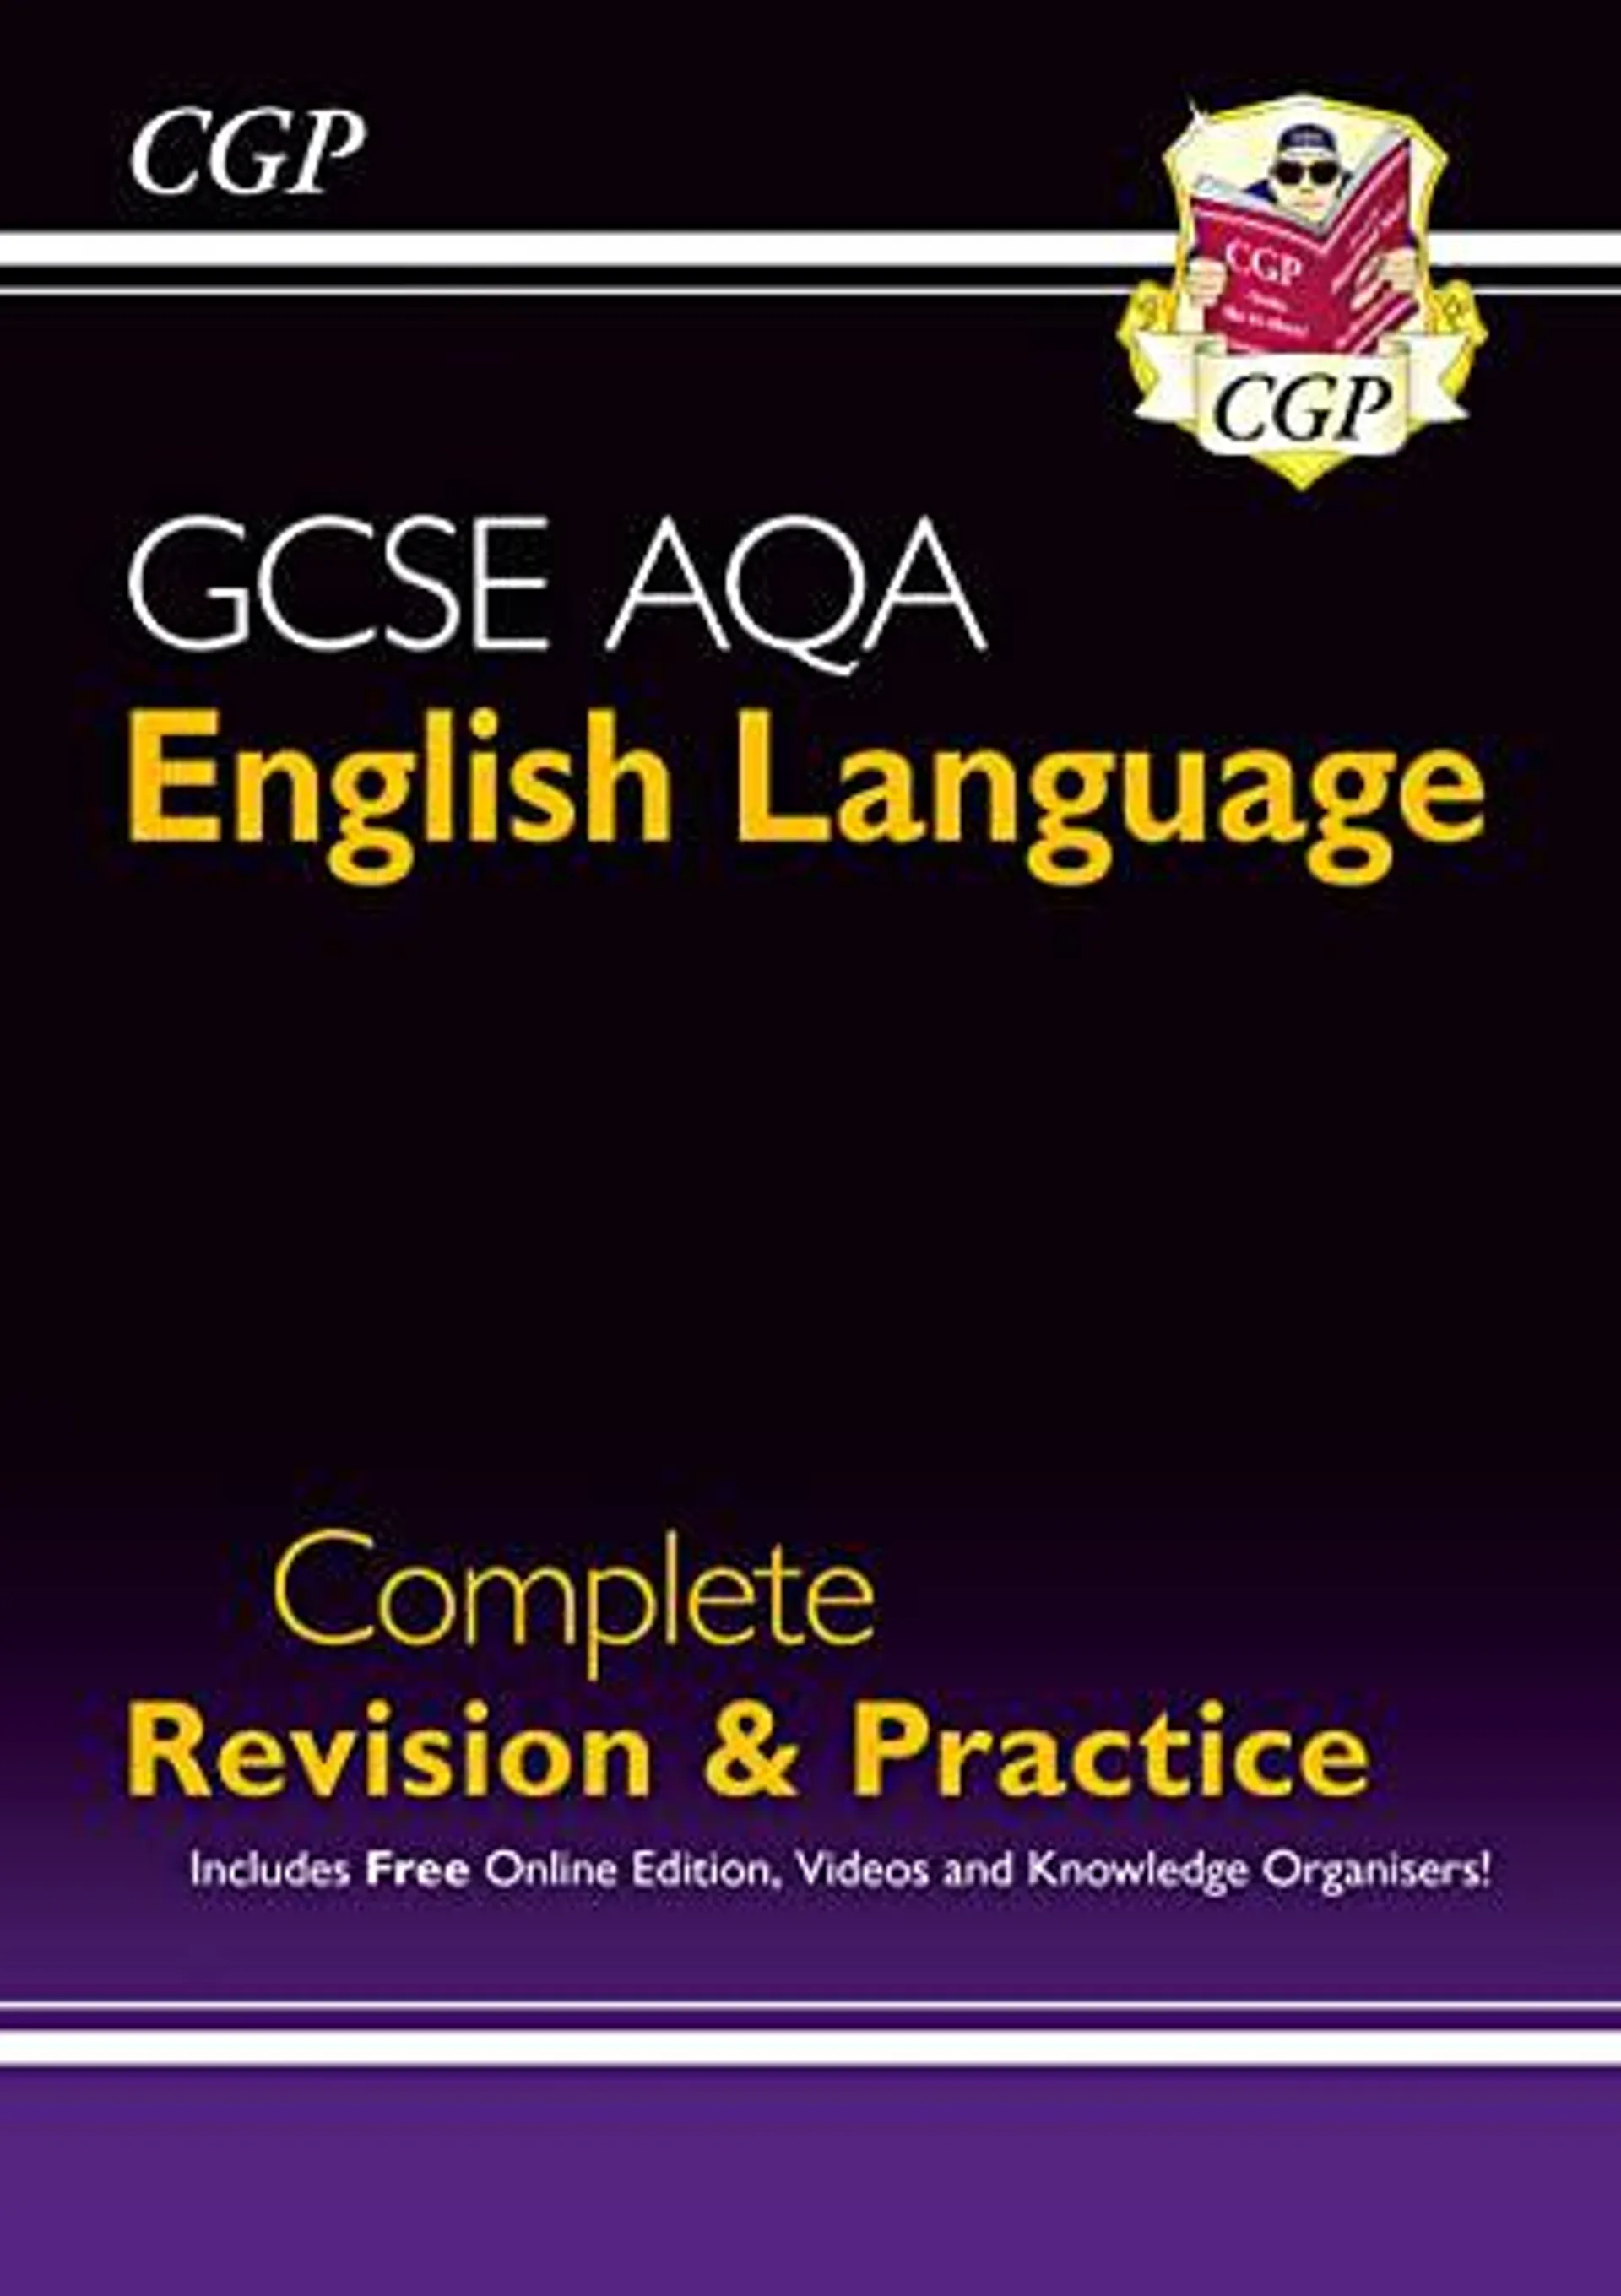 GCSE English Language AQA Complete Revision & Practice - Grade 9-1 Course (with Online Edition) by CGP Books